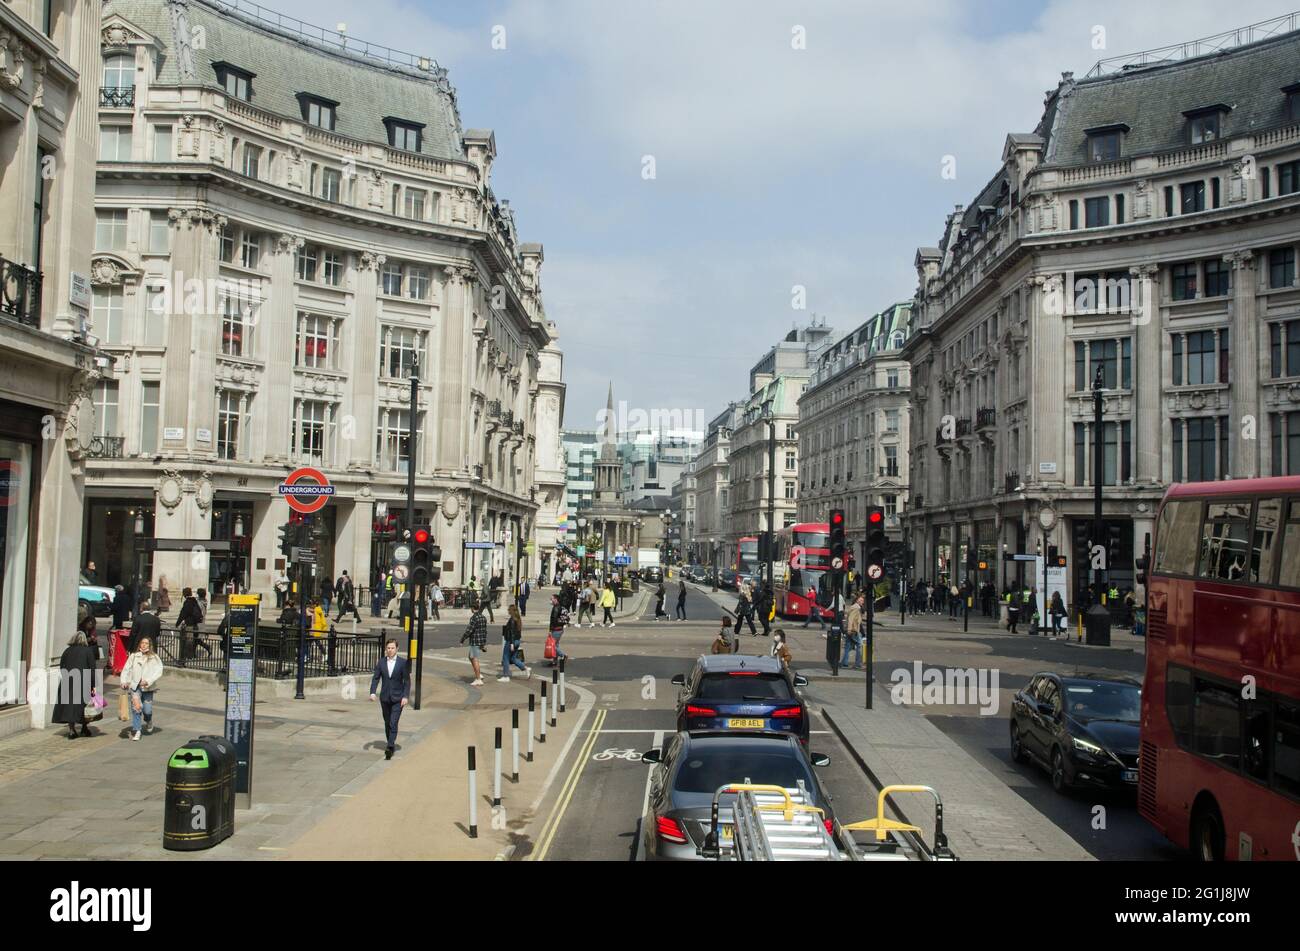 London, UK - April 21, 2021: Slightly elevated view of Oxford Circuis with Upper Regent Street straight ahead and the landmark church  All Soul's, Lan Stock Photo